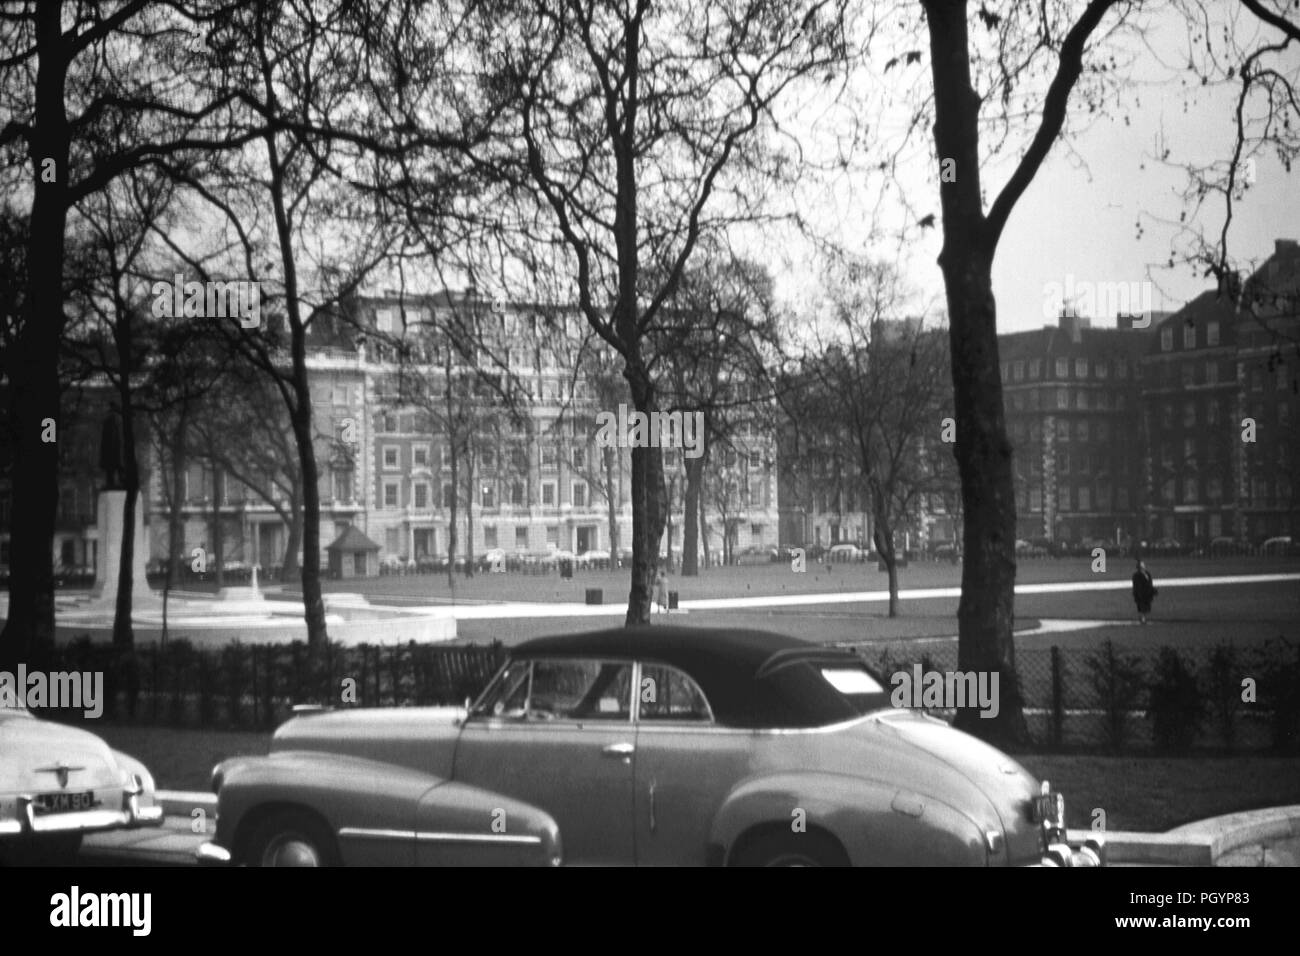 American Embassy and the Public Health Service facilities in Grosvenor Square, London, England, 1957. Image courtesy Centers for Disease Control (CDC). () Stock Photo